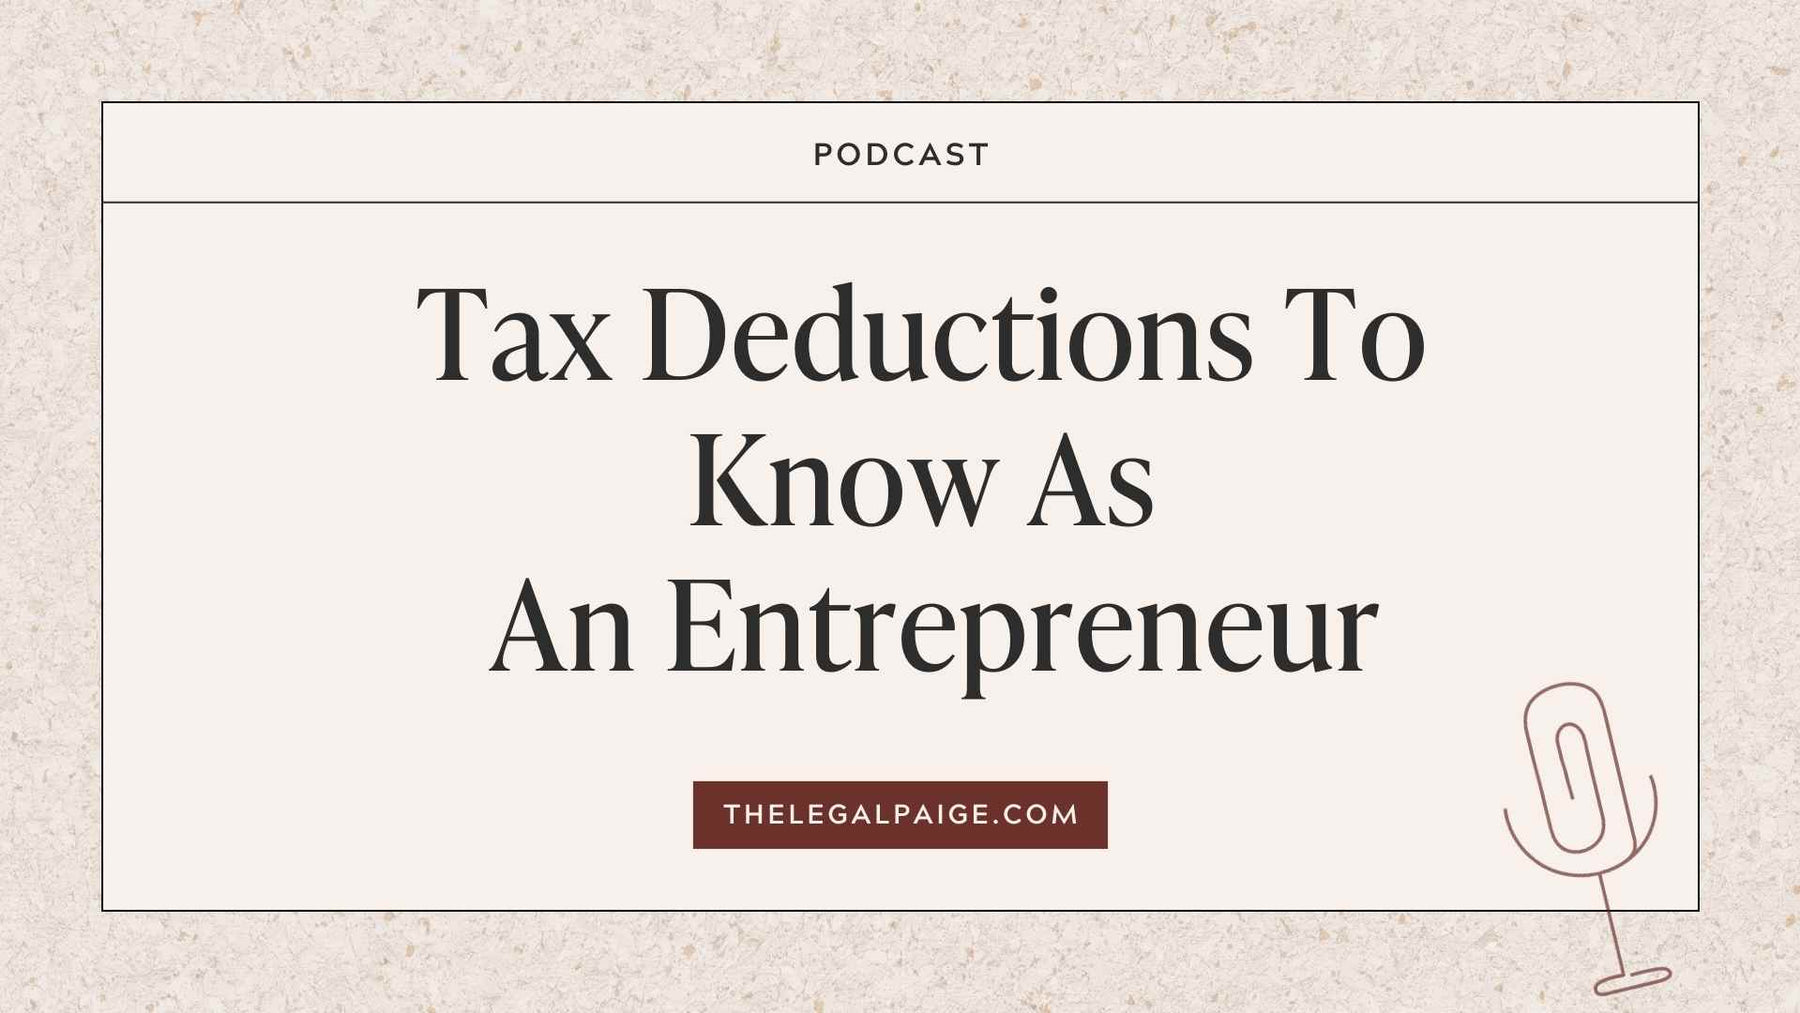 Episode 78: Tax Deductions To Know As An Entrepreneur